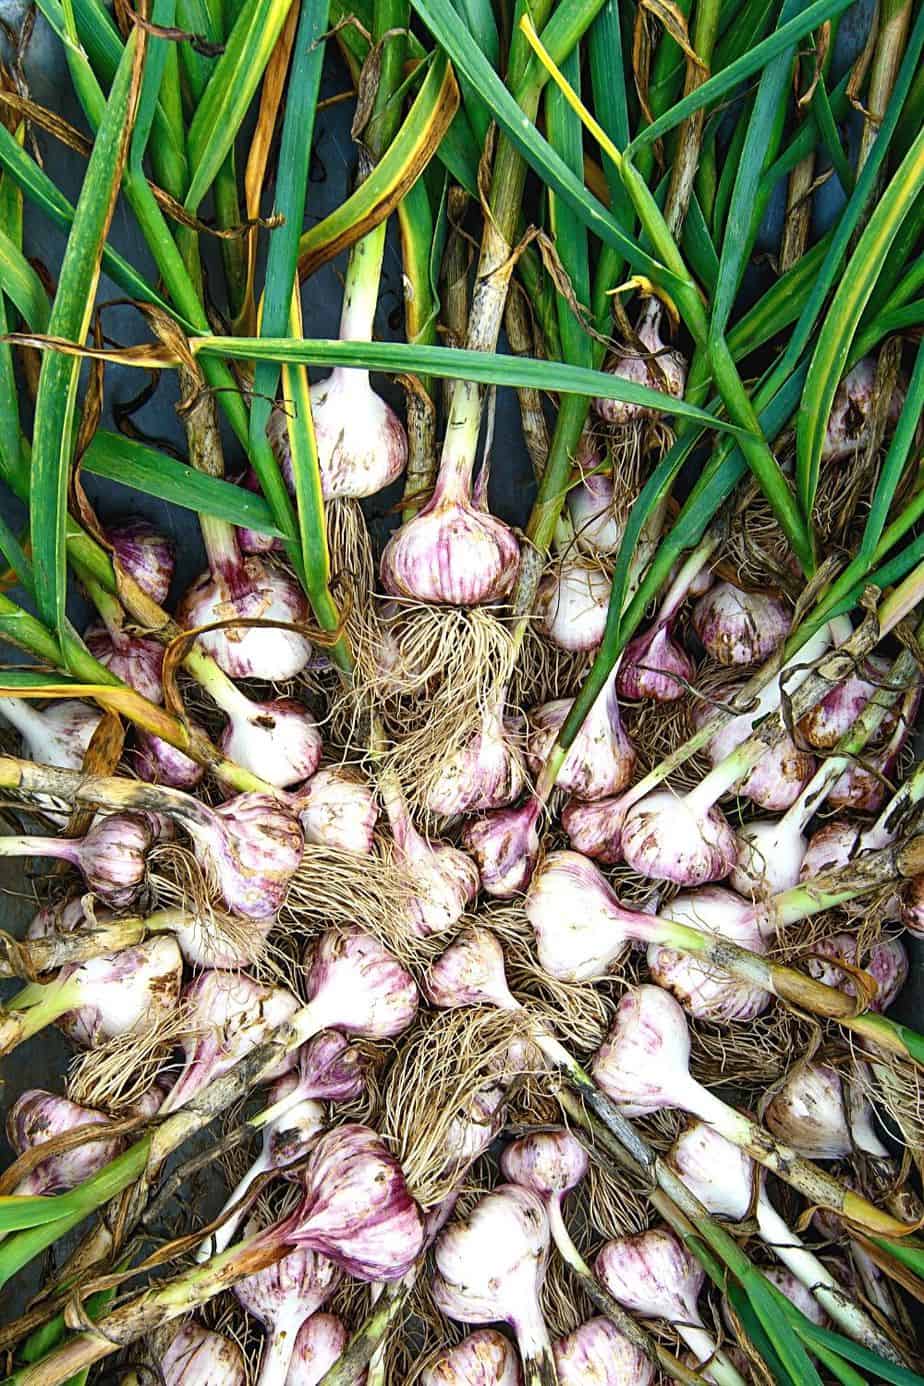 Garlic, one of the most versatile vegetables, can also grow in raised bed gardens